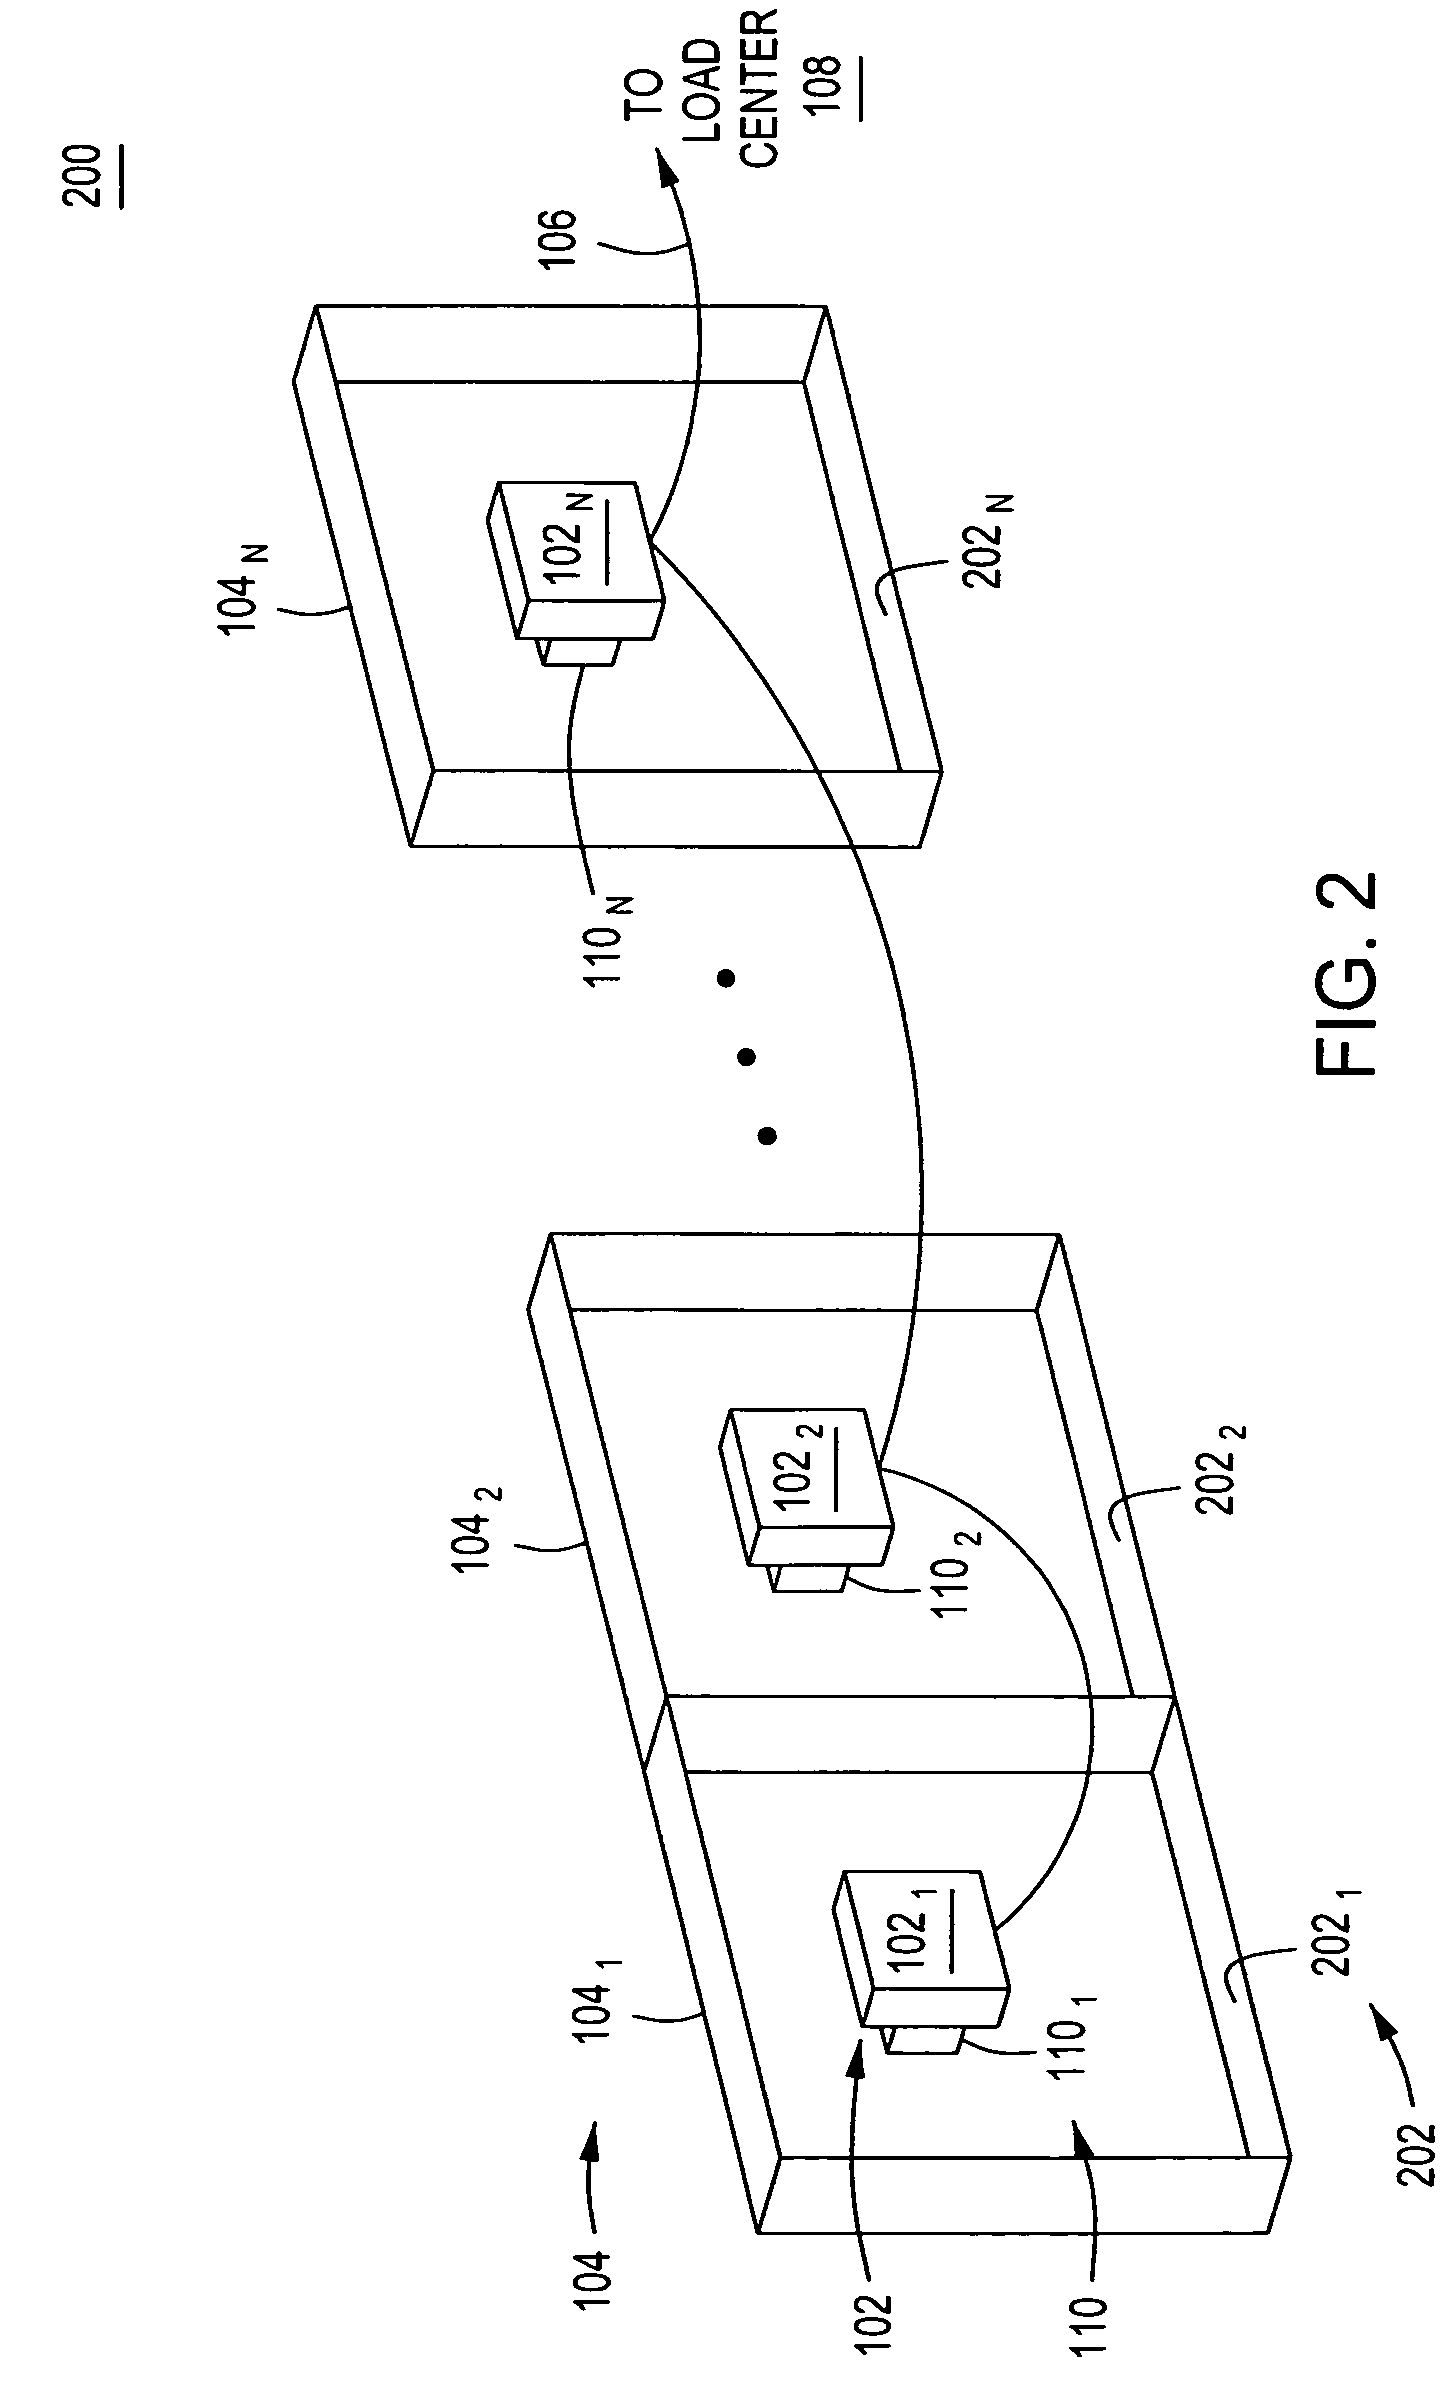 Apparatus for coupling power generated by a photovoltaic module to an output